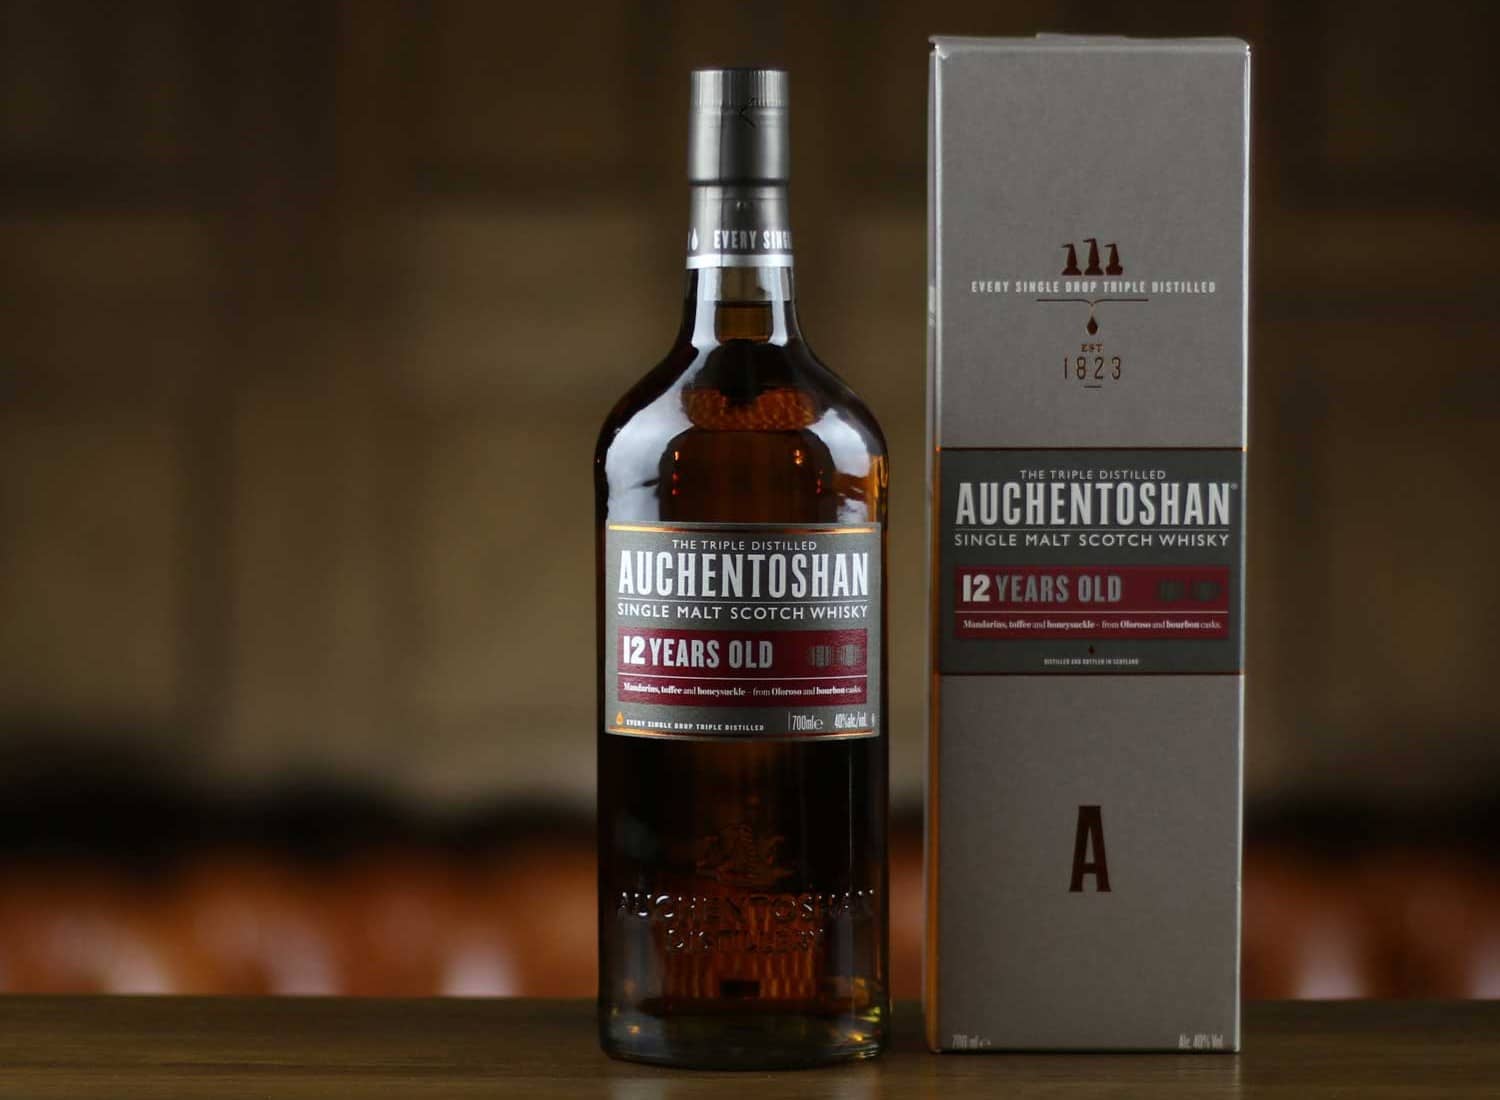 Auchentoshan is a brand from the Lowland, that produces one of the different types of scotch whisky